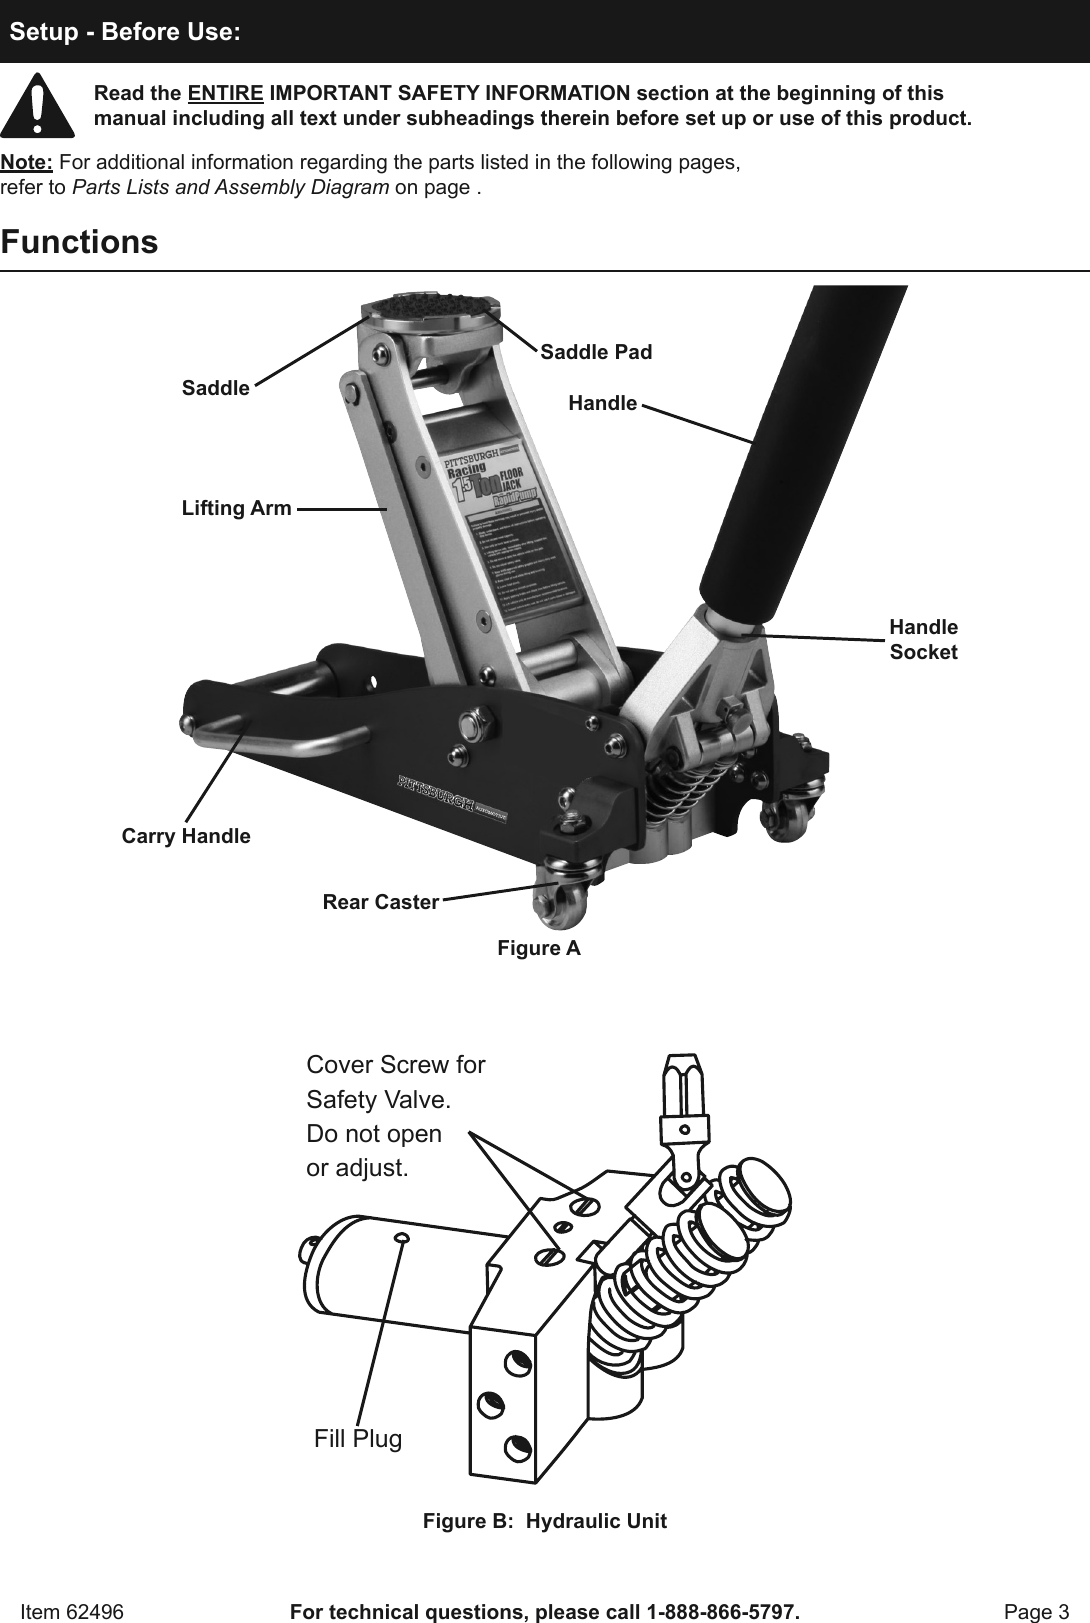 Page 3 of 8 - Manual For The 62496 1.5 Ton Compact Aluminum Racing Floor Jack With Rapid Pump®